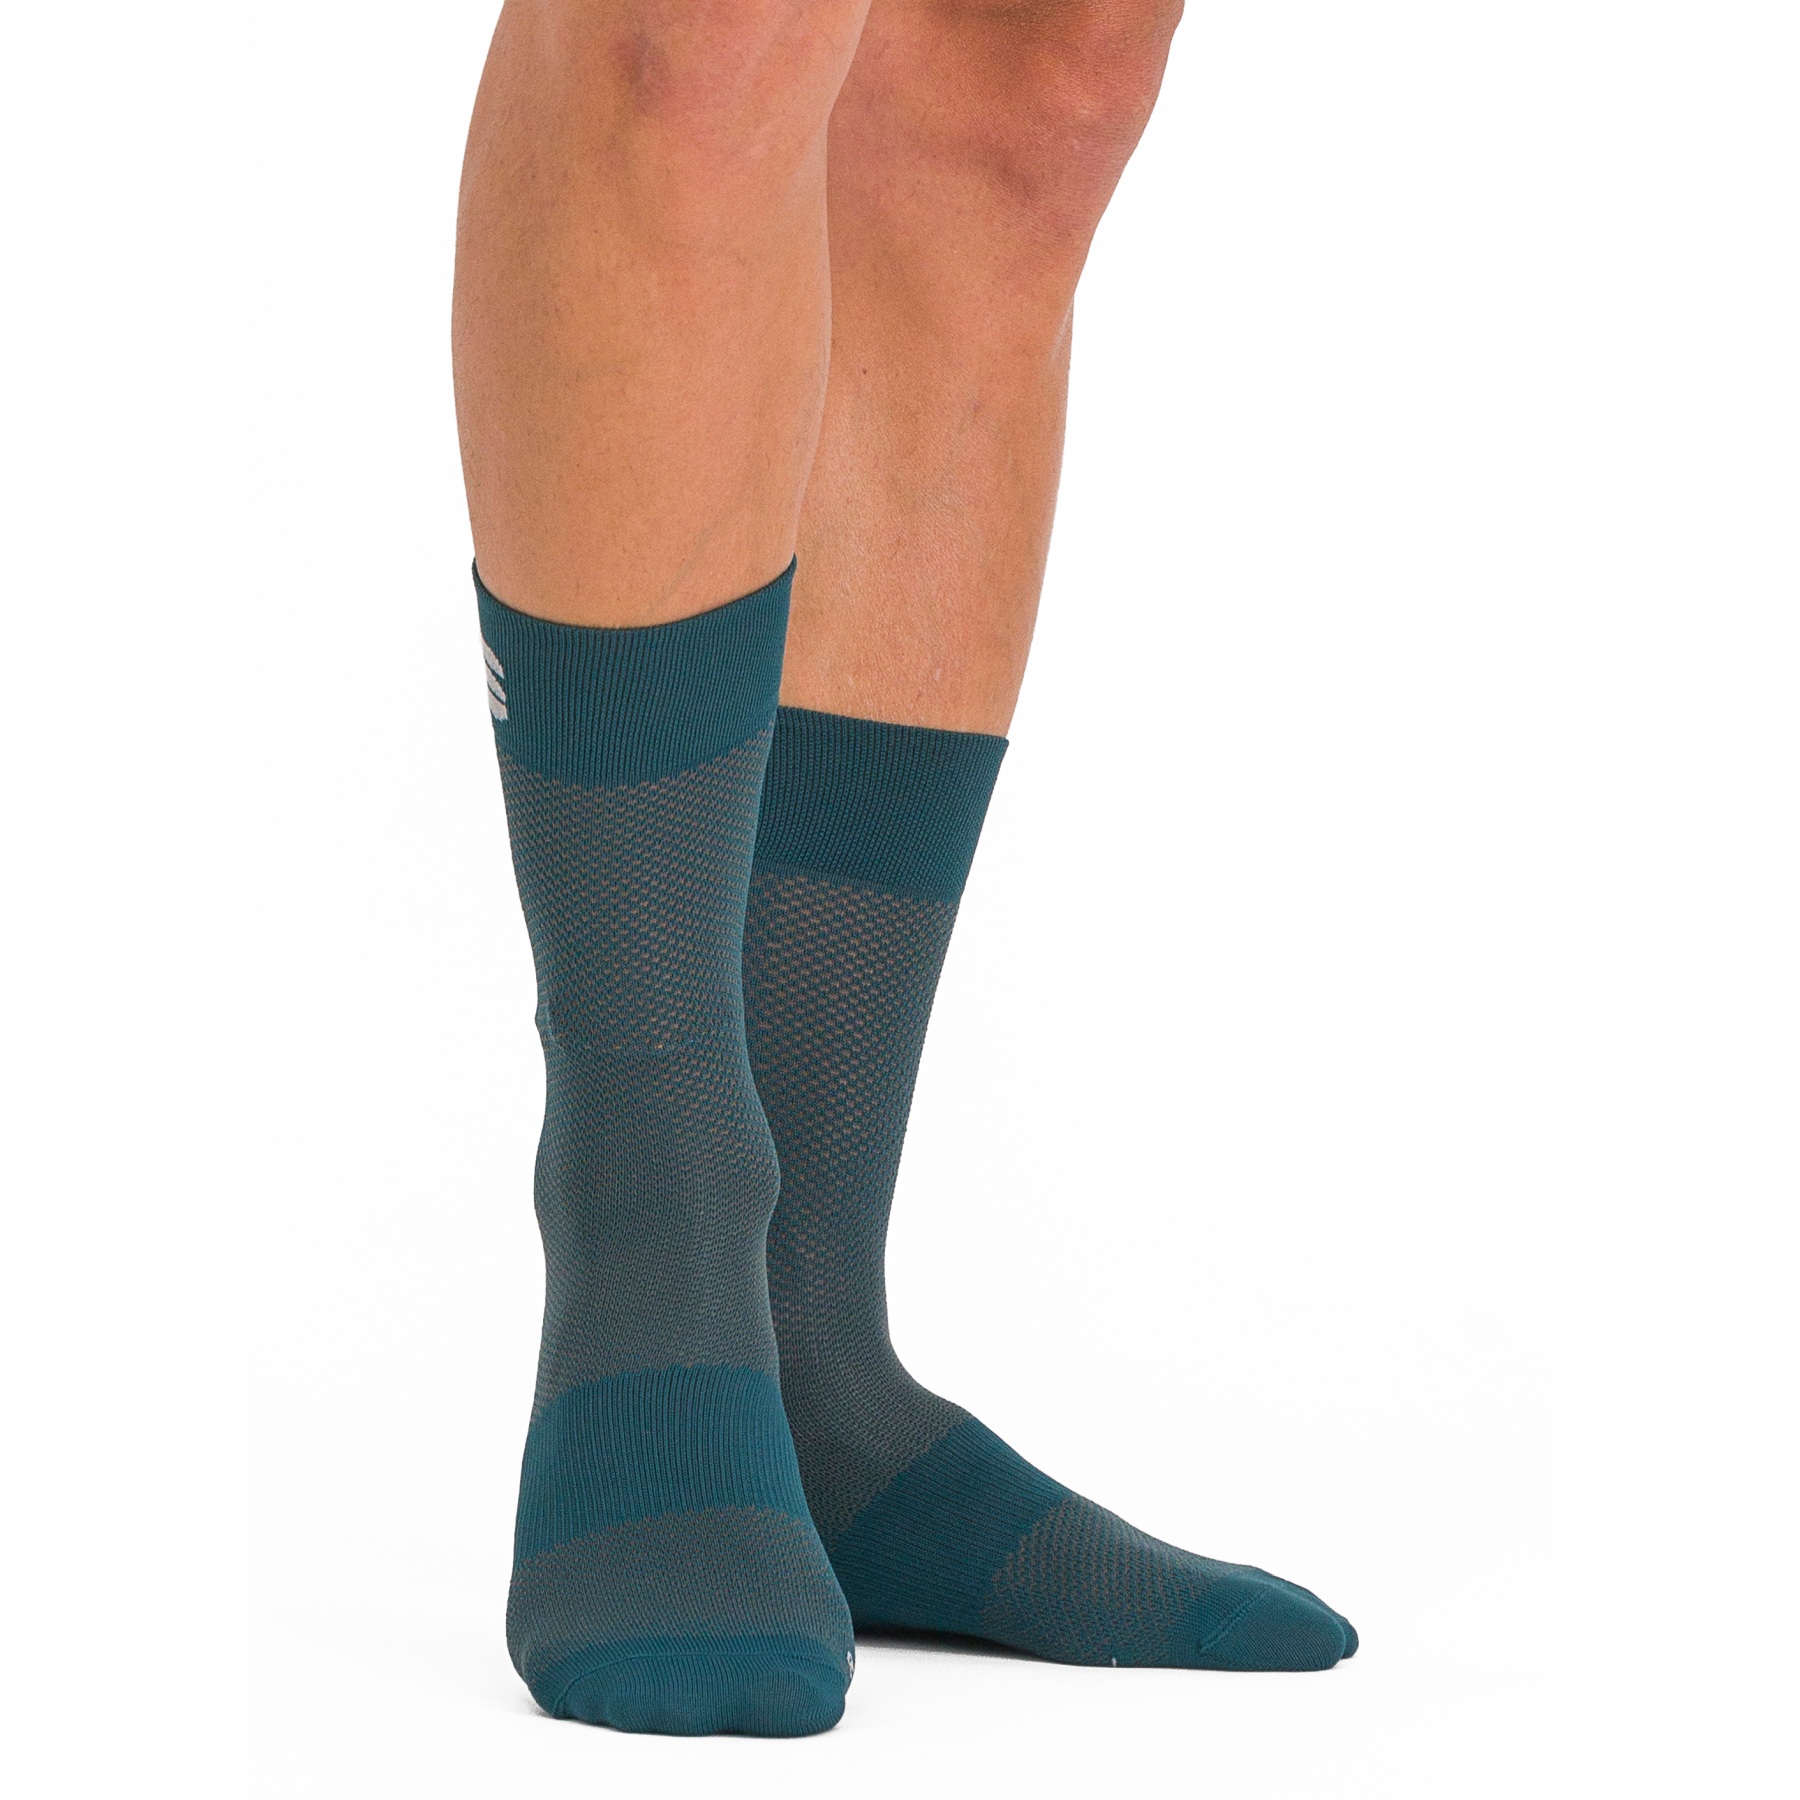 Picture of Sportful Matchy Socks Men - 374 Shade Spruce